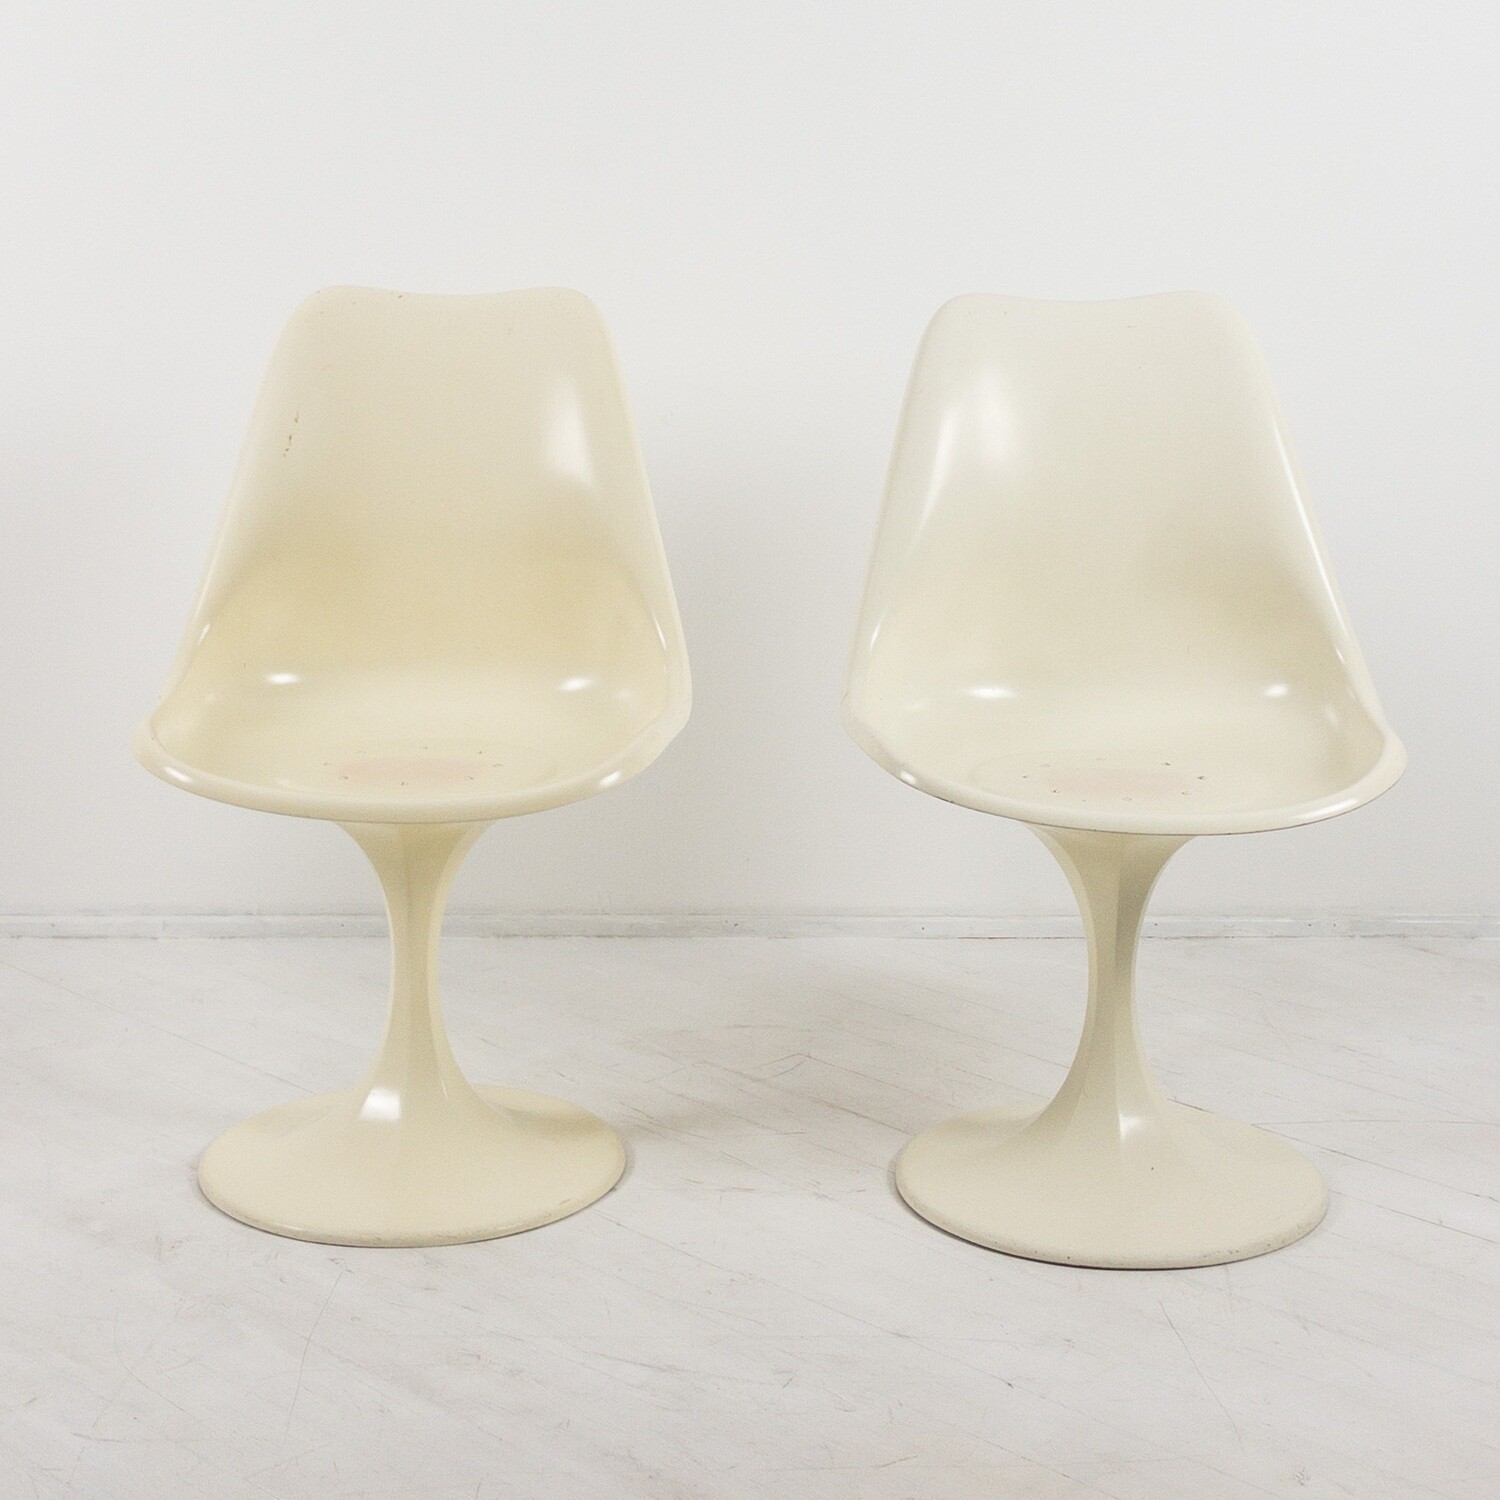 Pair of Tulip chairs produced in the 1970s